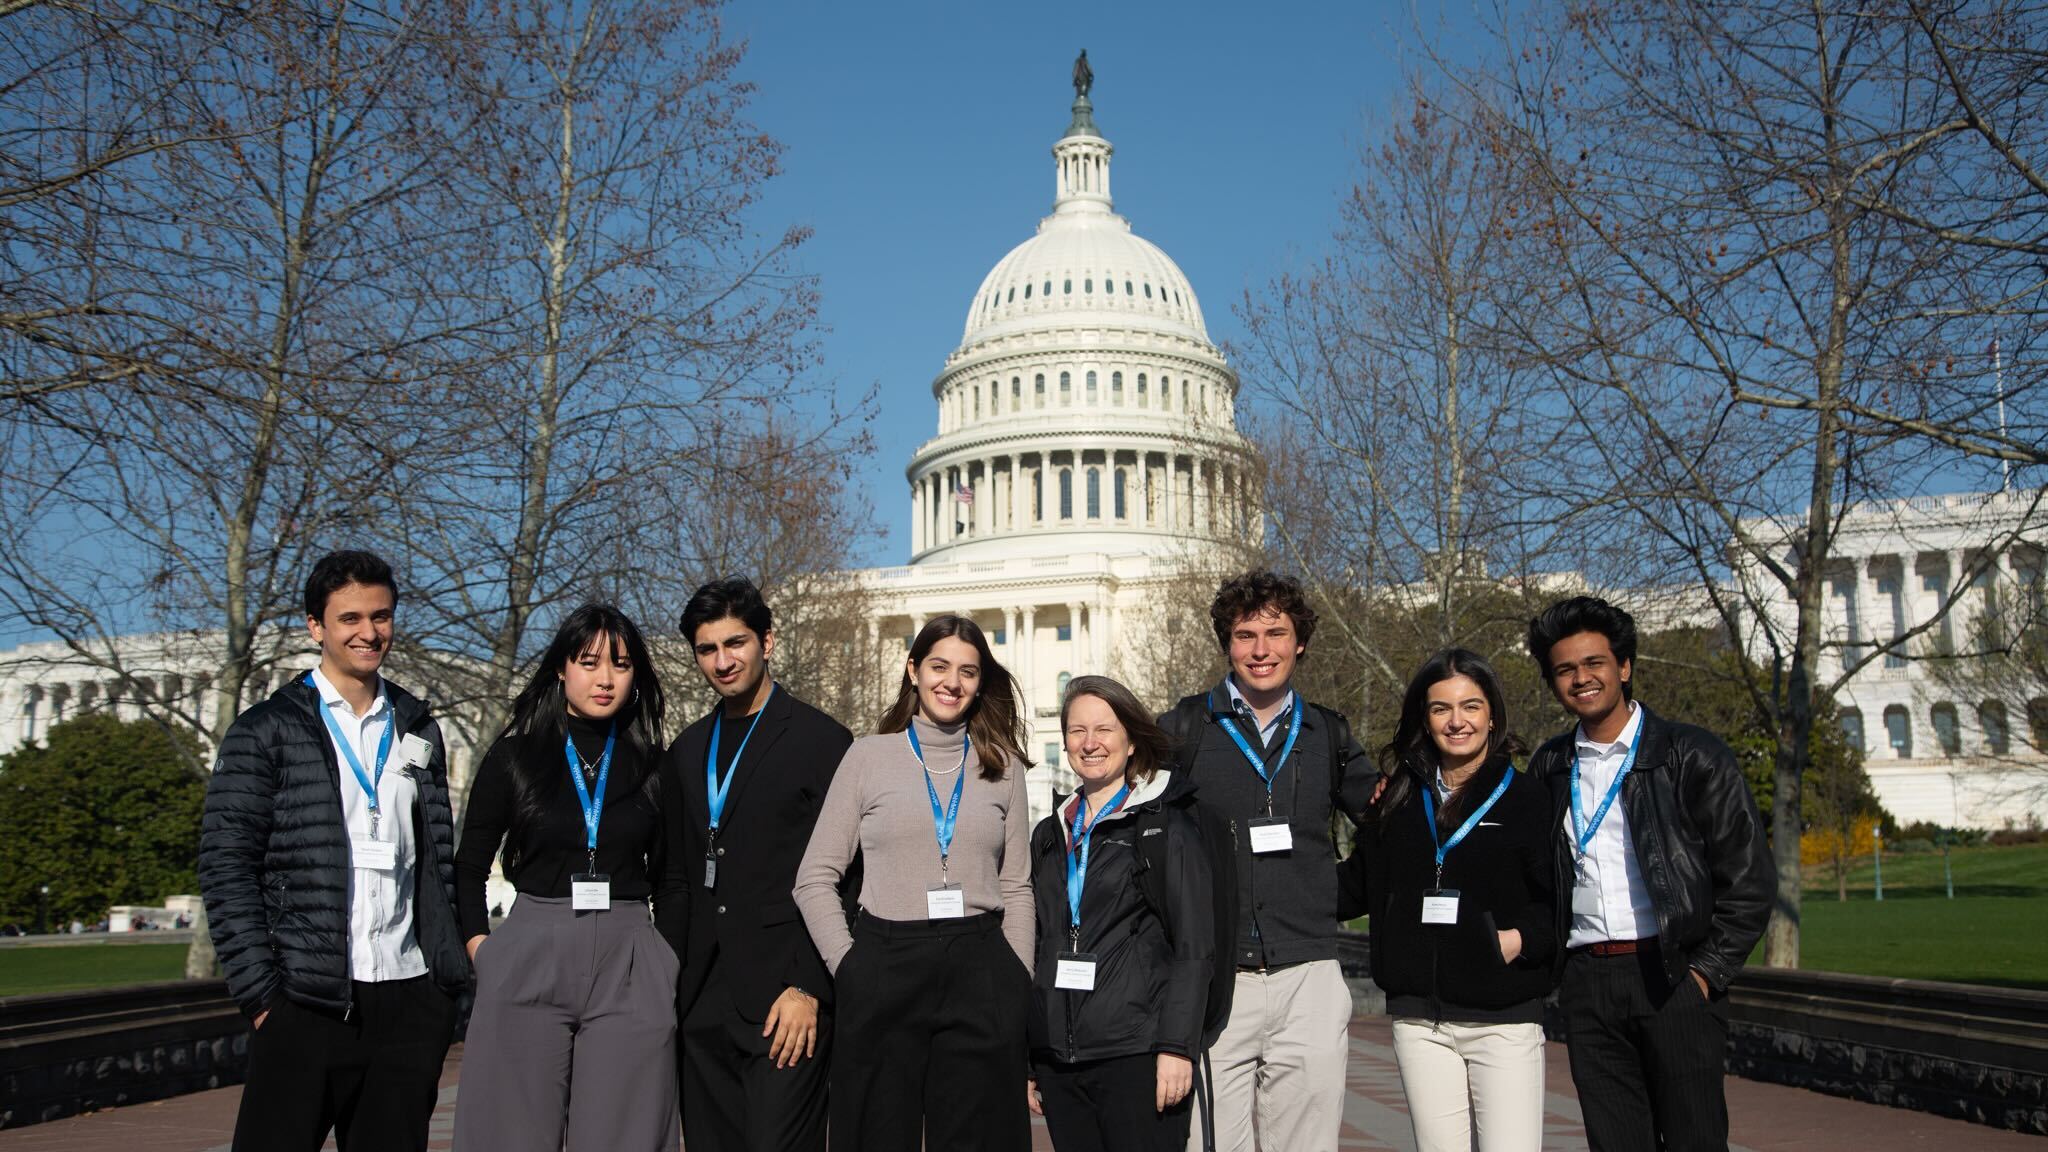 Photo of students and Dr. Peterson in Washington, D.C. for Scholars At Risk's Student Advocacy Days on March 2024. The students and Dr. Peterson and standing in front of the USA Capitol/